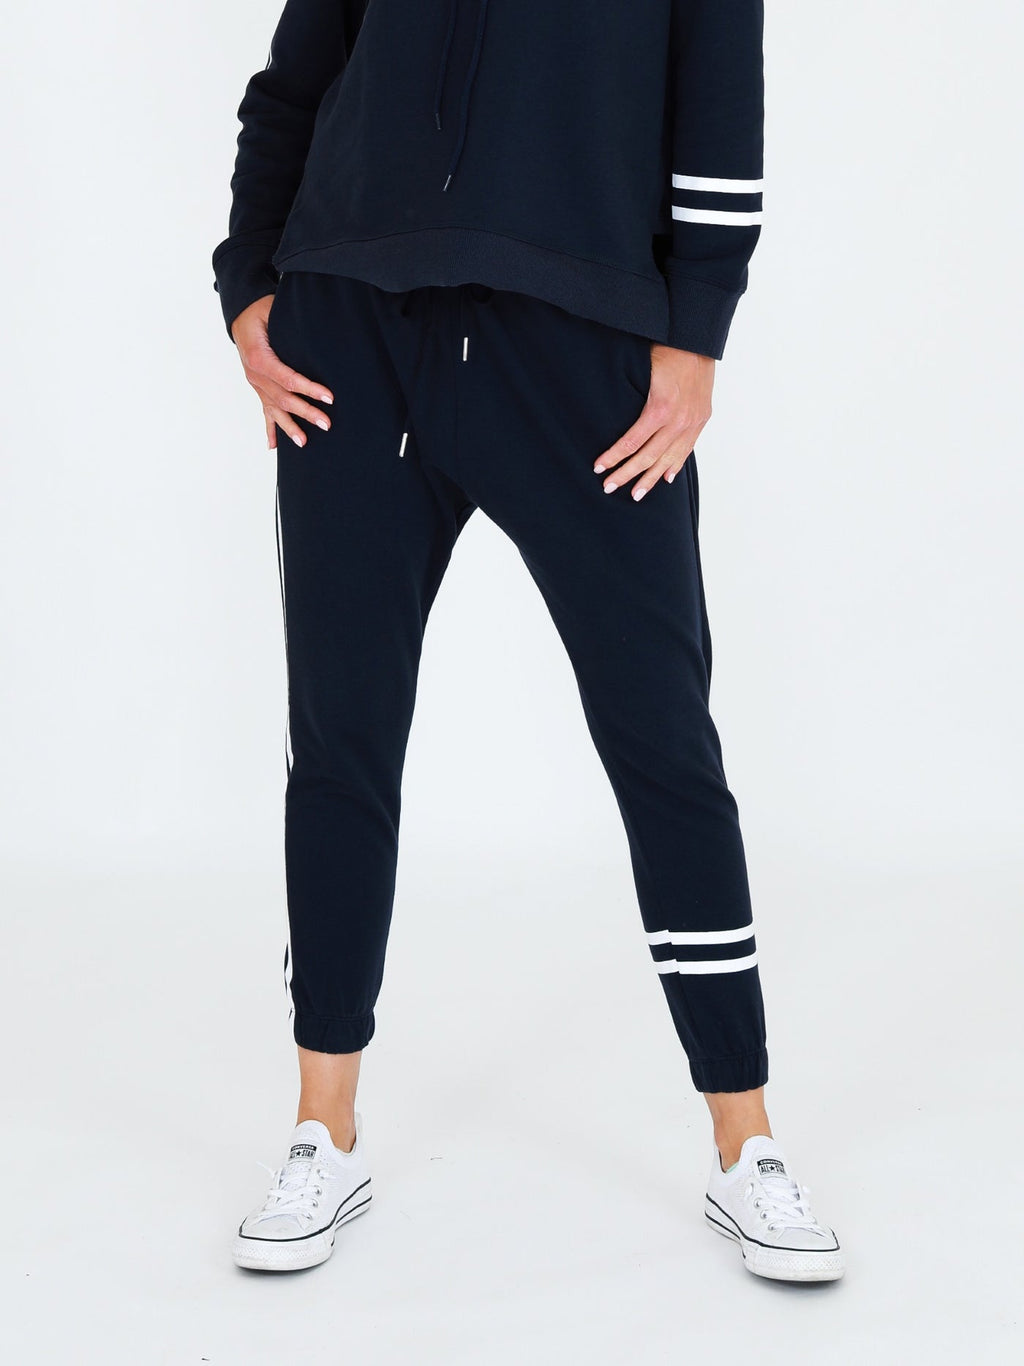 Charlise Two-Stripes Sweatpants

INK